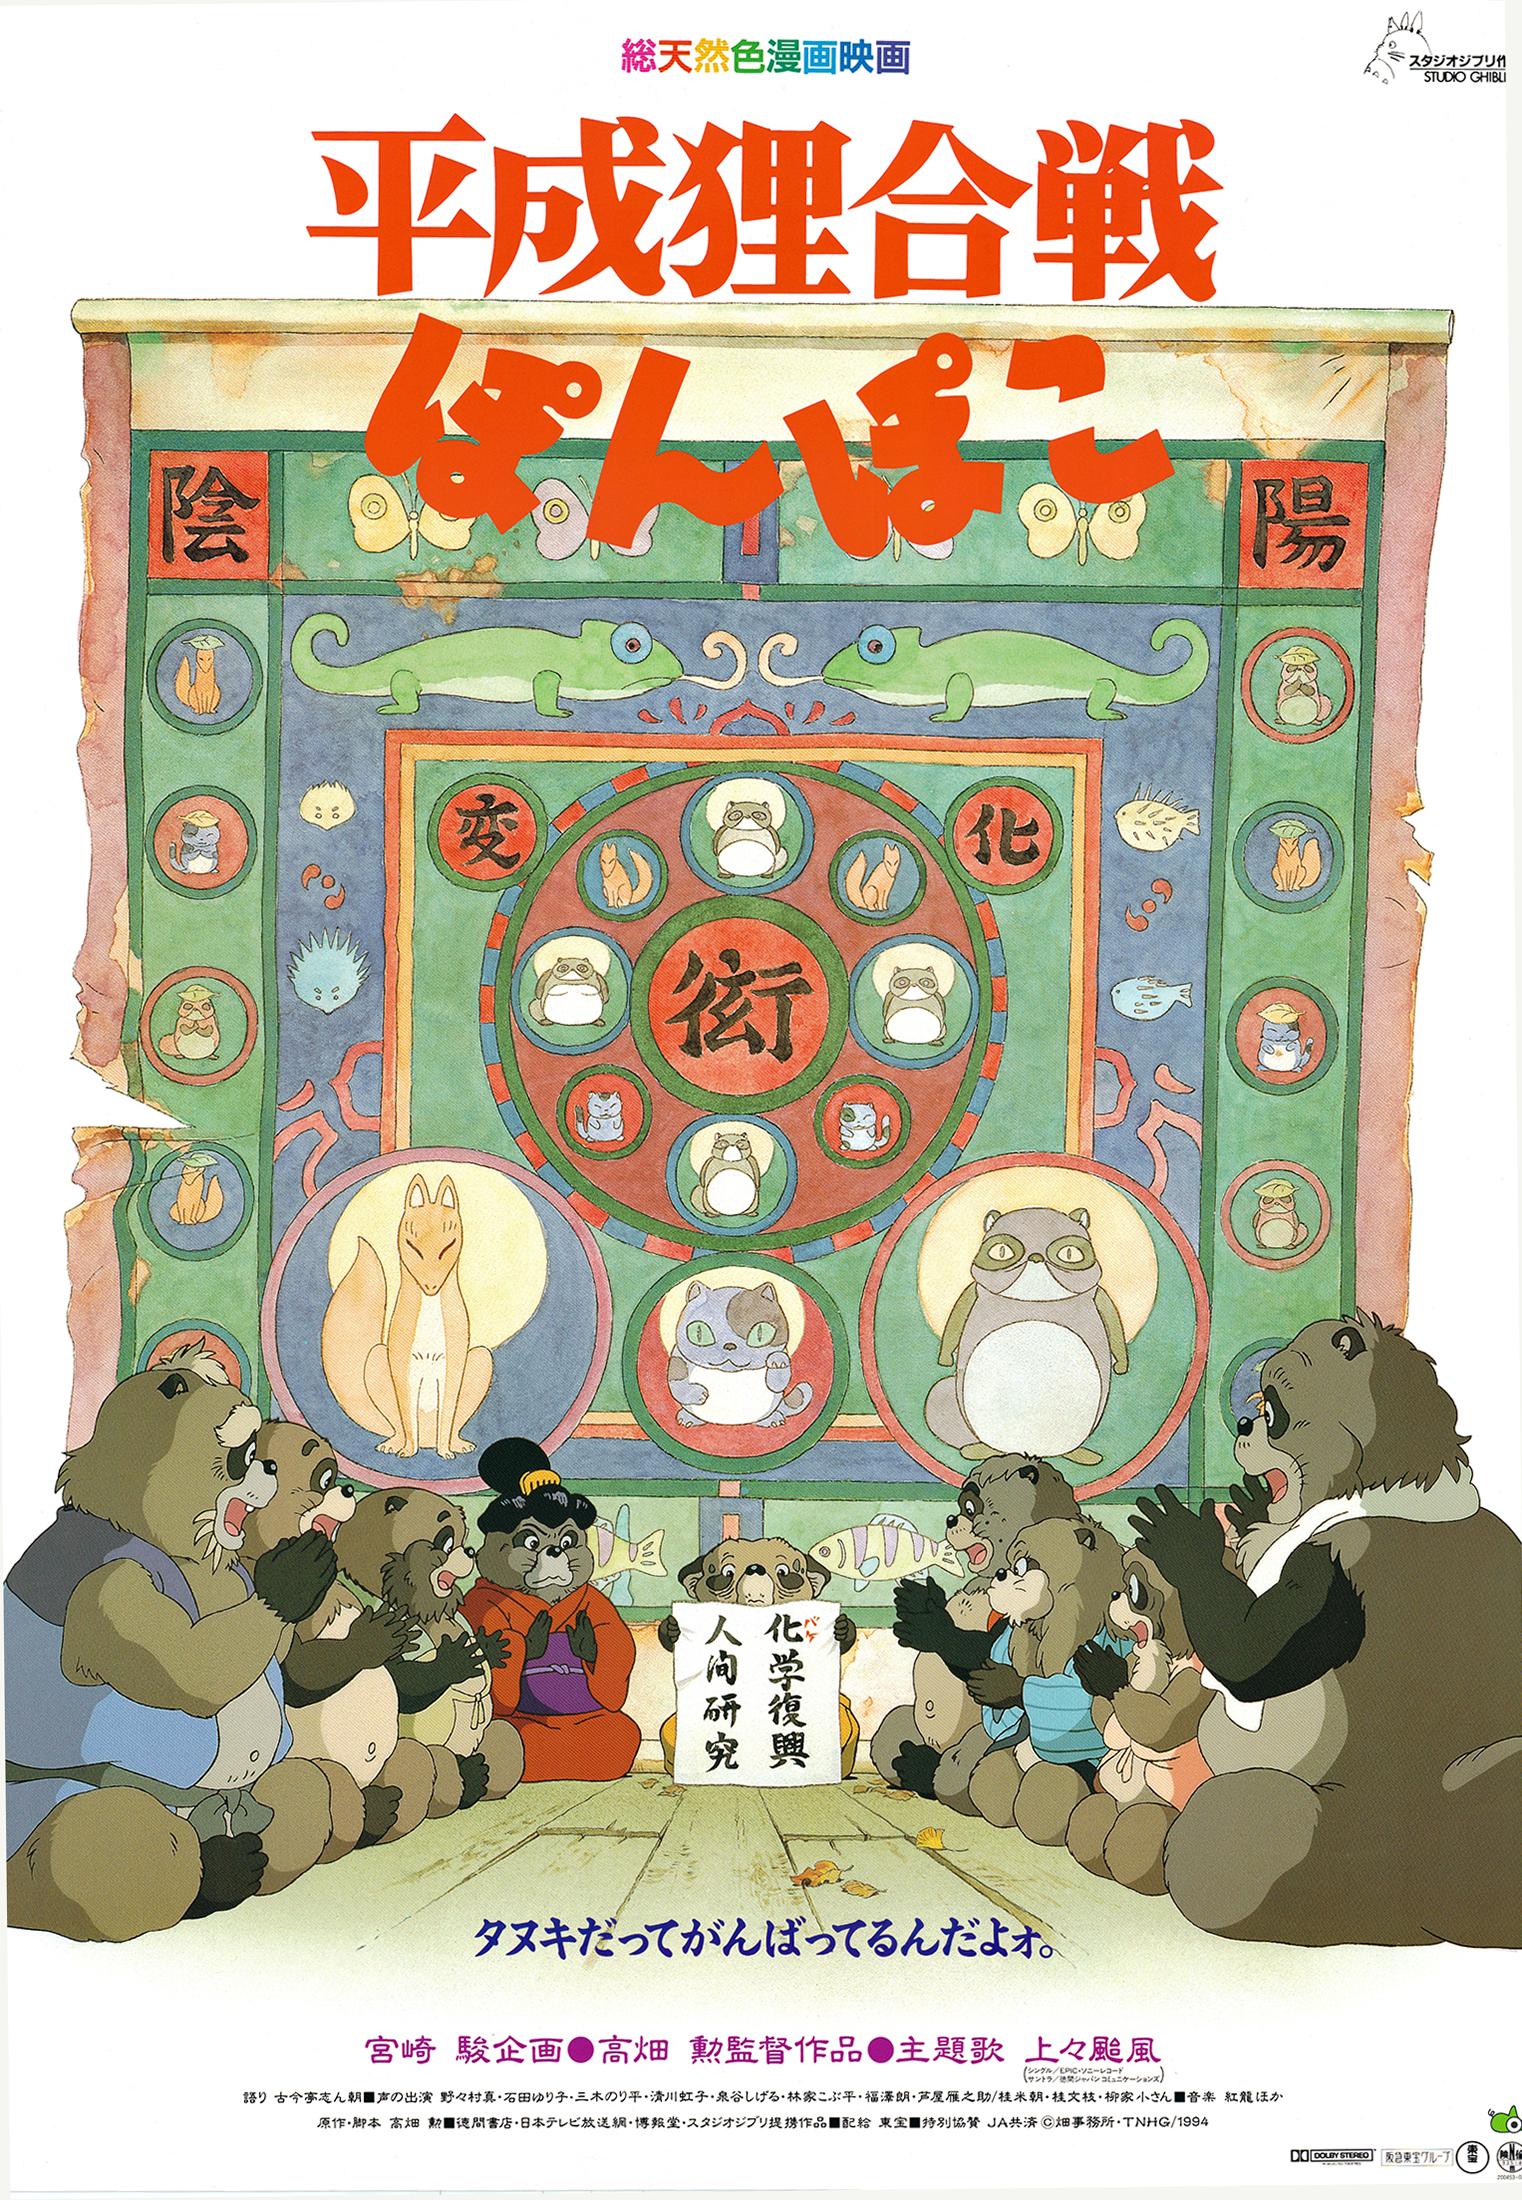 An original vintage poster from Studio Ghibli's 1994 animation Pom Poko, written and directed by Isao Takahata of Grave of the Fireflies fame.

Size: B2